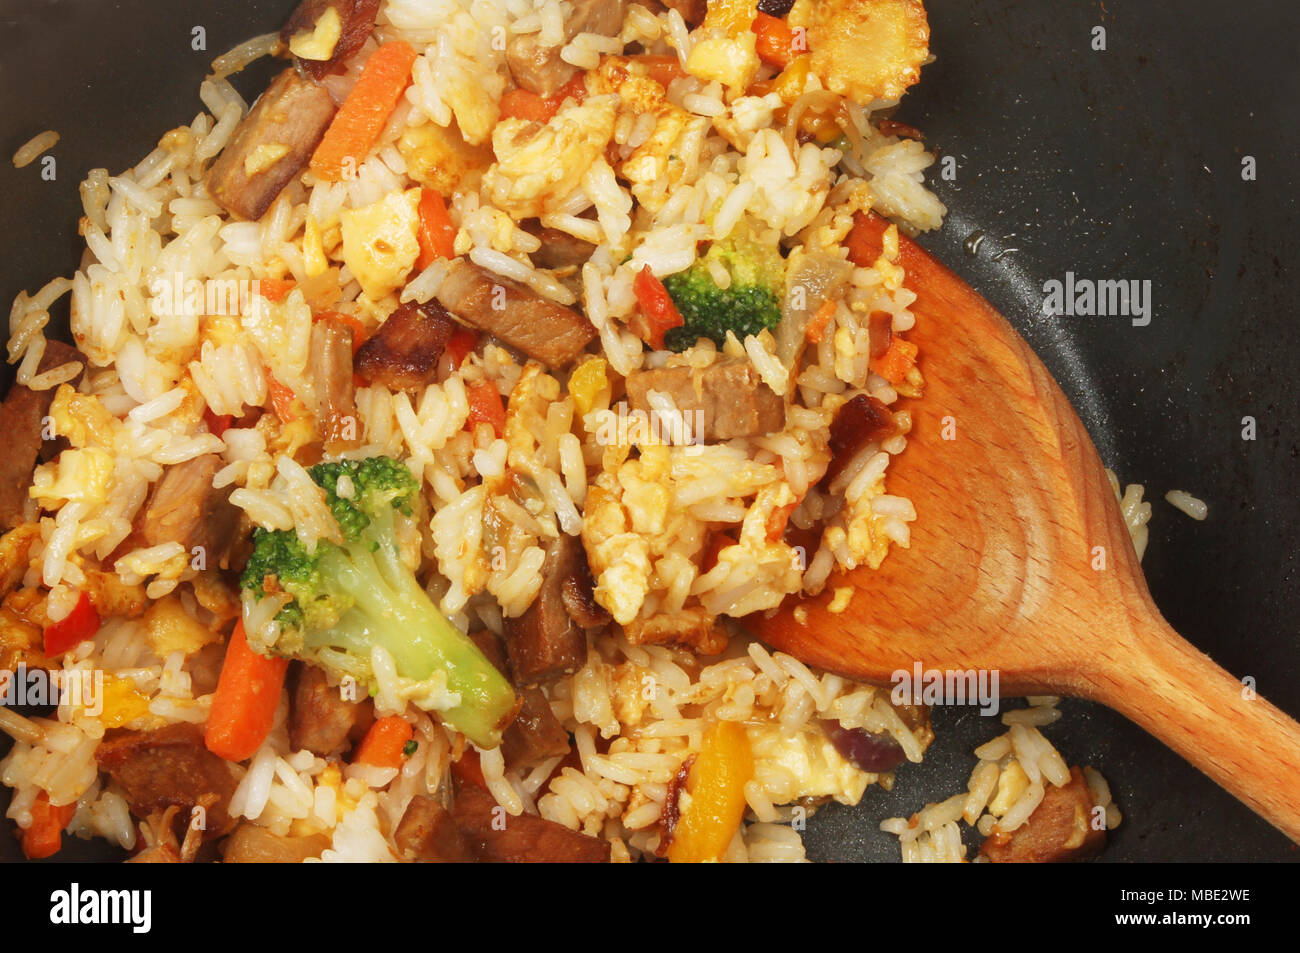 Closeup of fried rice with egg, pork and vegetables in a wok with a wooden spoon Stock Photo